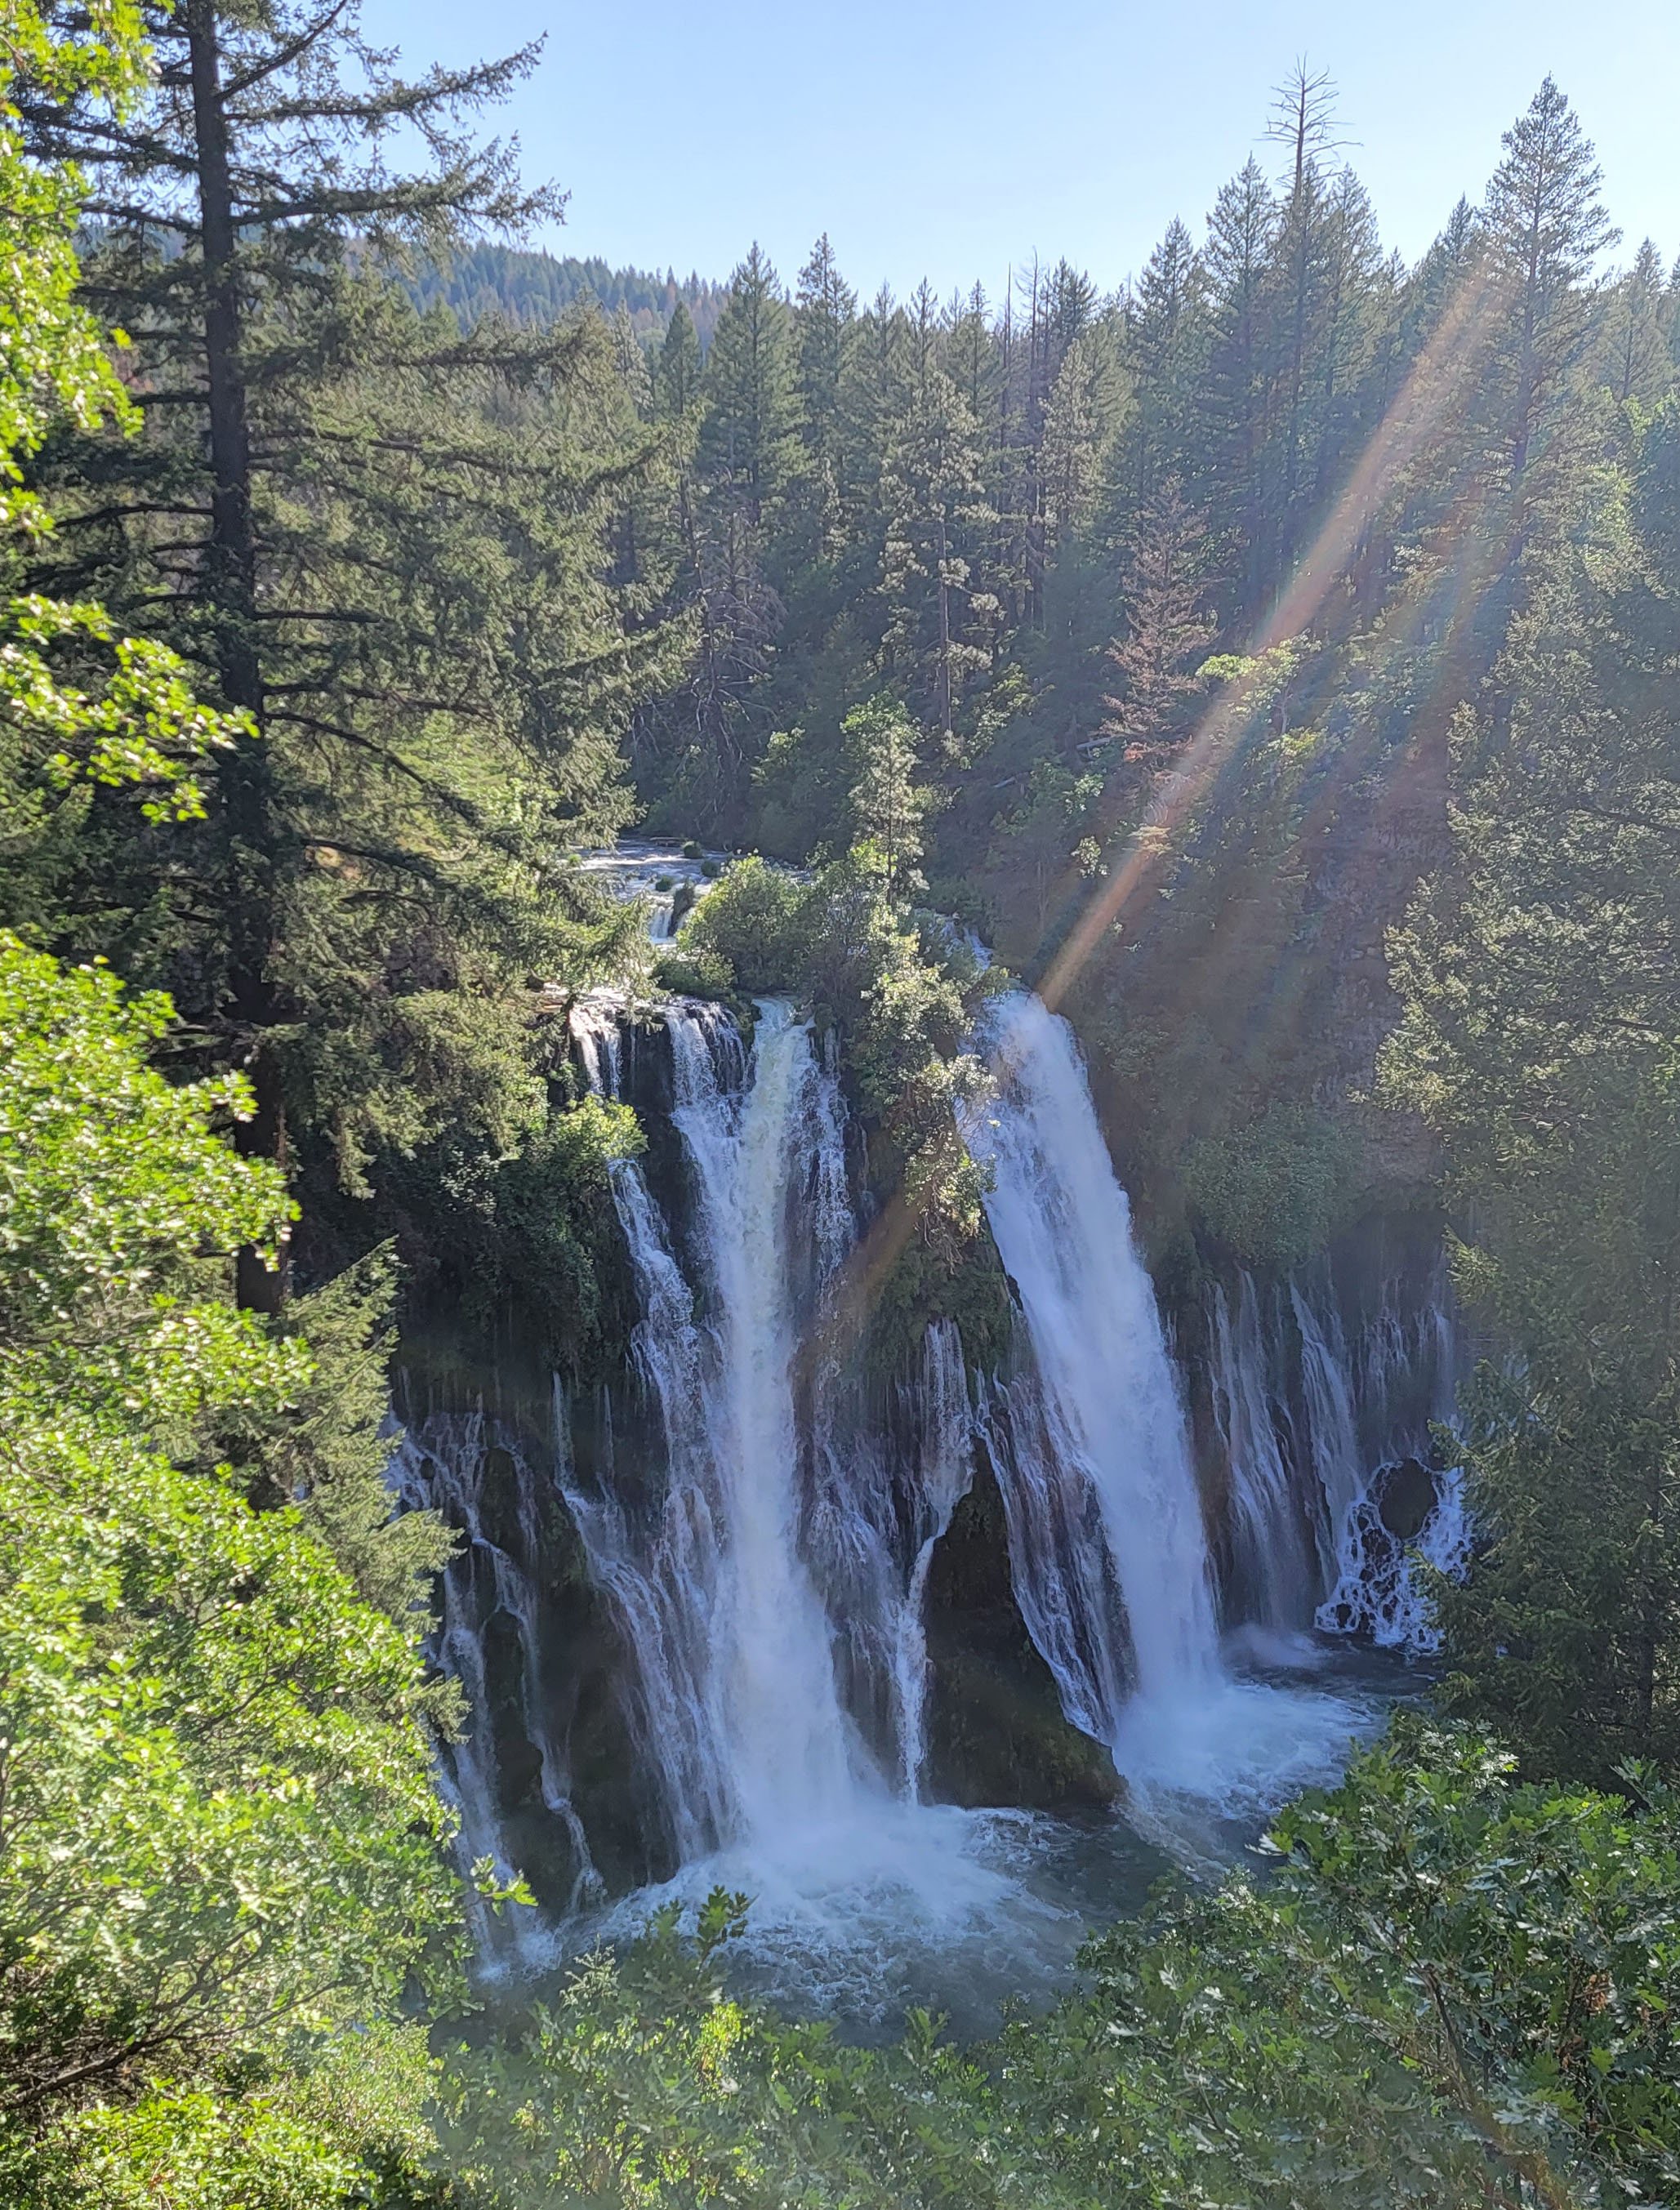 Burney Falls. I think. There's a little loop of trails and some campgrounds around here. Nice little spot.